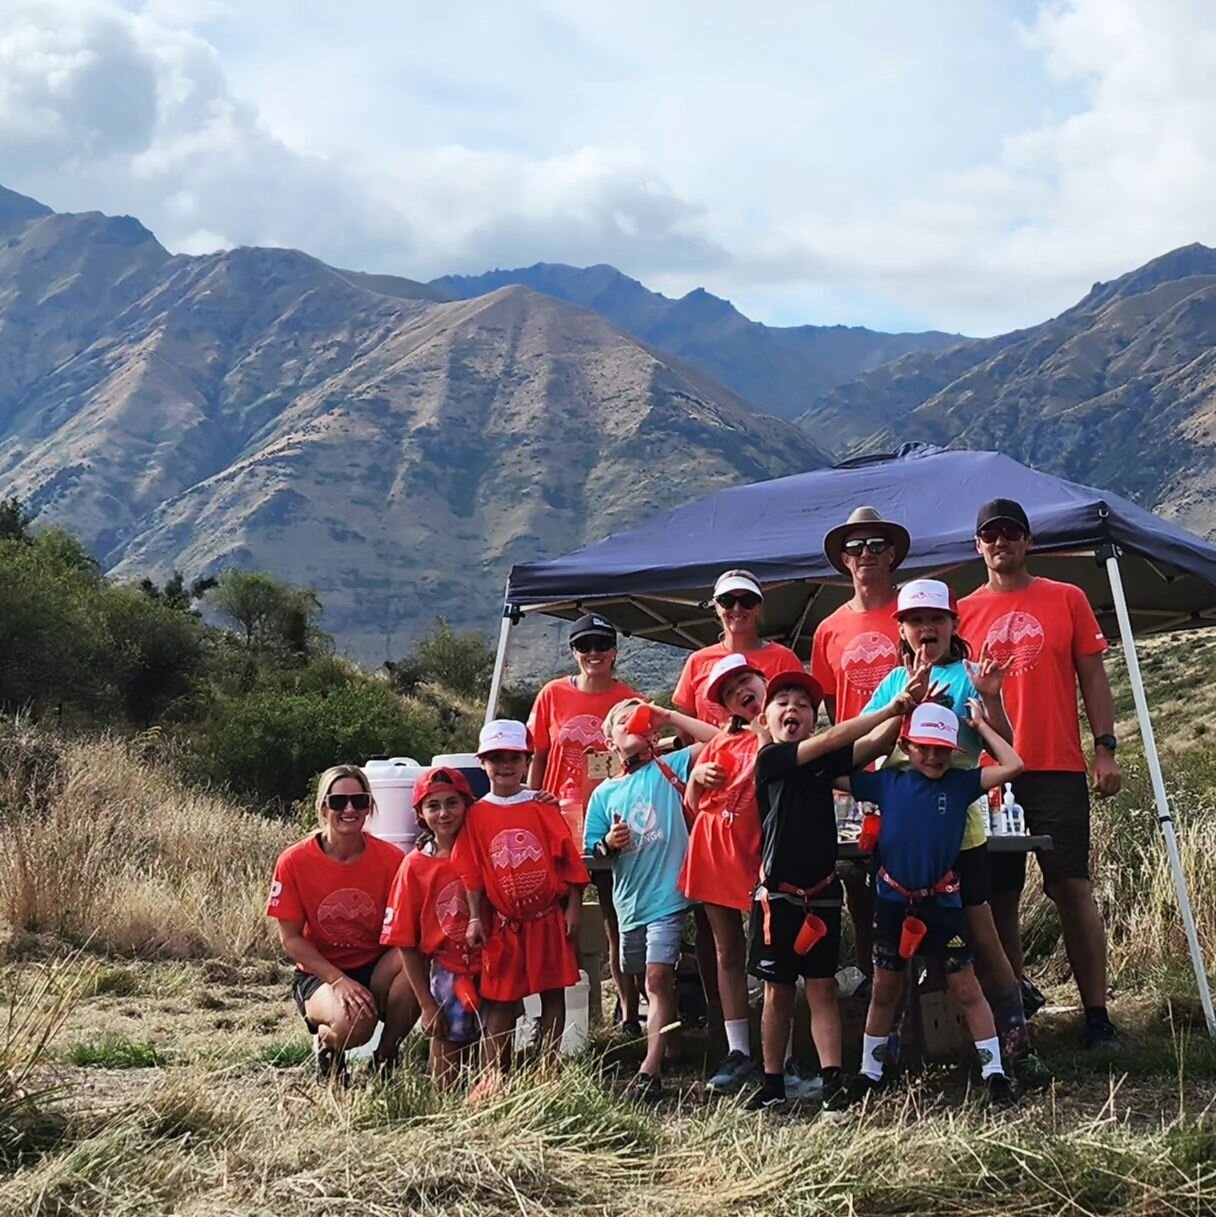 @challengewanaka what a day! 👏🙌 
We had an absolute blast out on course volunteering for the awesome athletes on course. 

Huge congrats to our TFC podium winners @arnacraig and @kcathro and a massive high five to Rebecca who was the smiliest perso